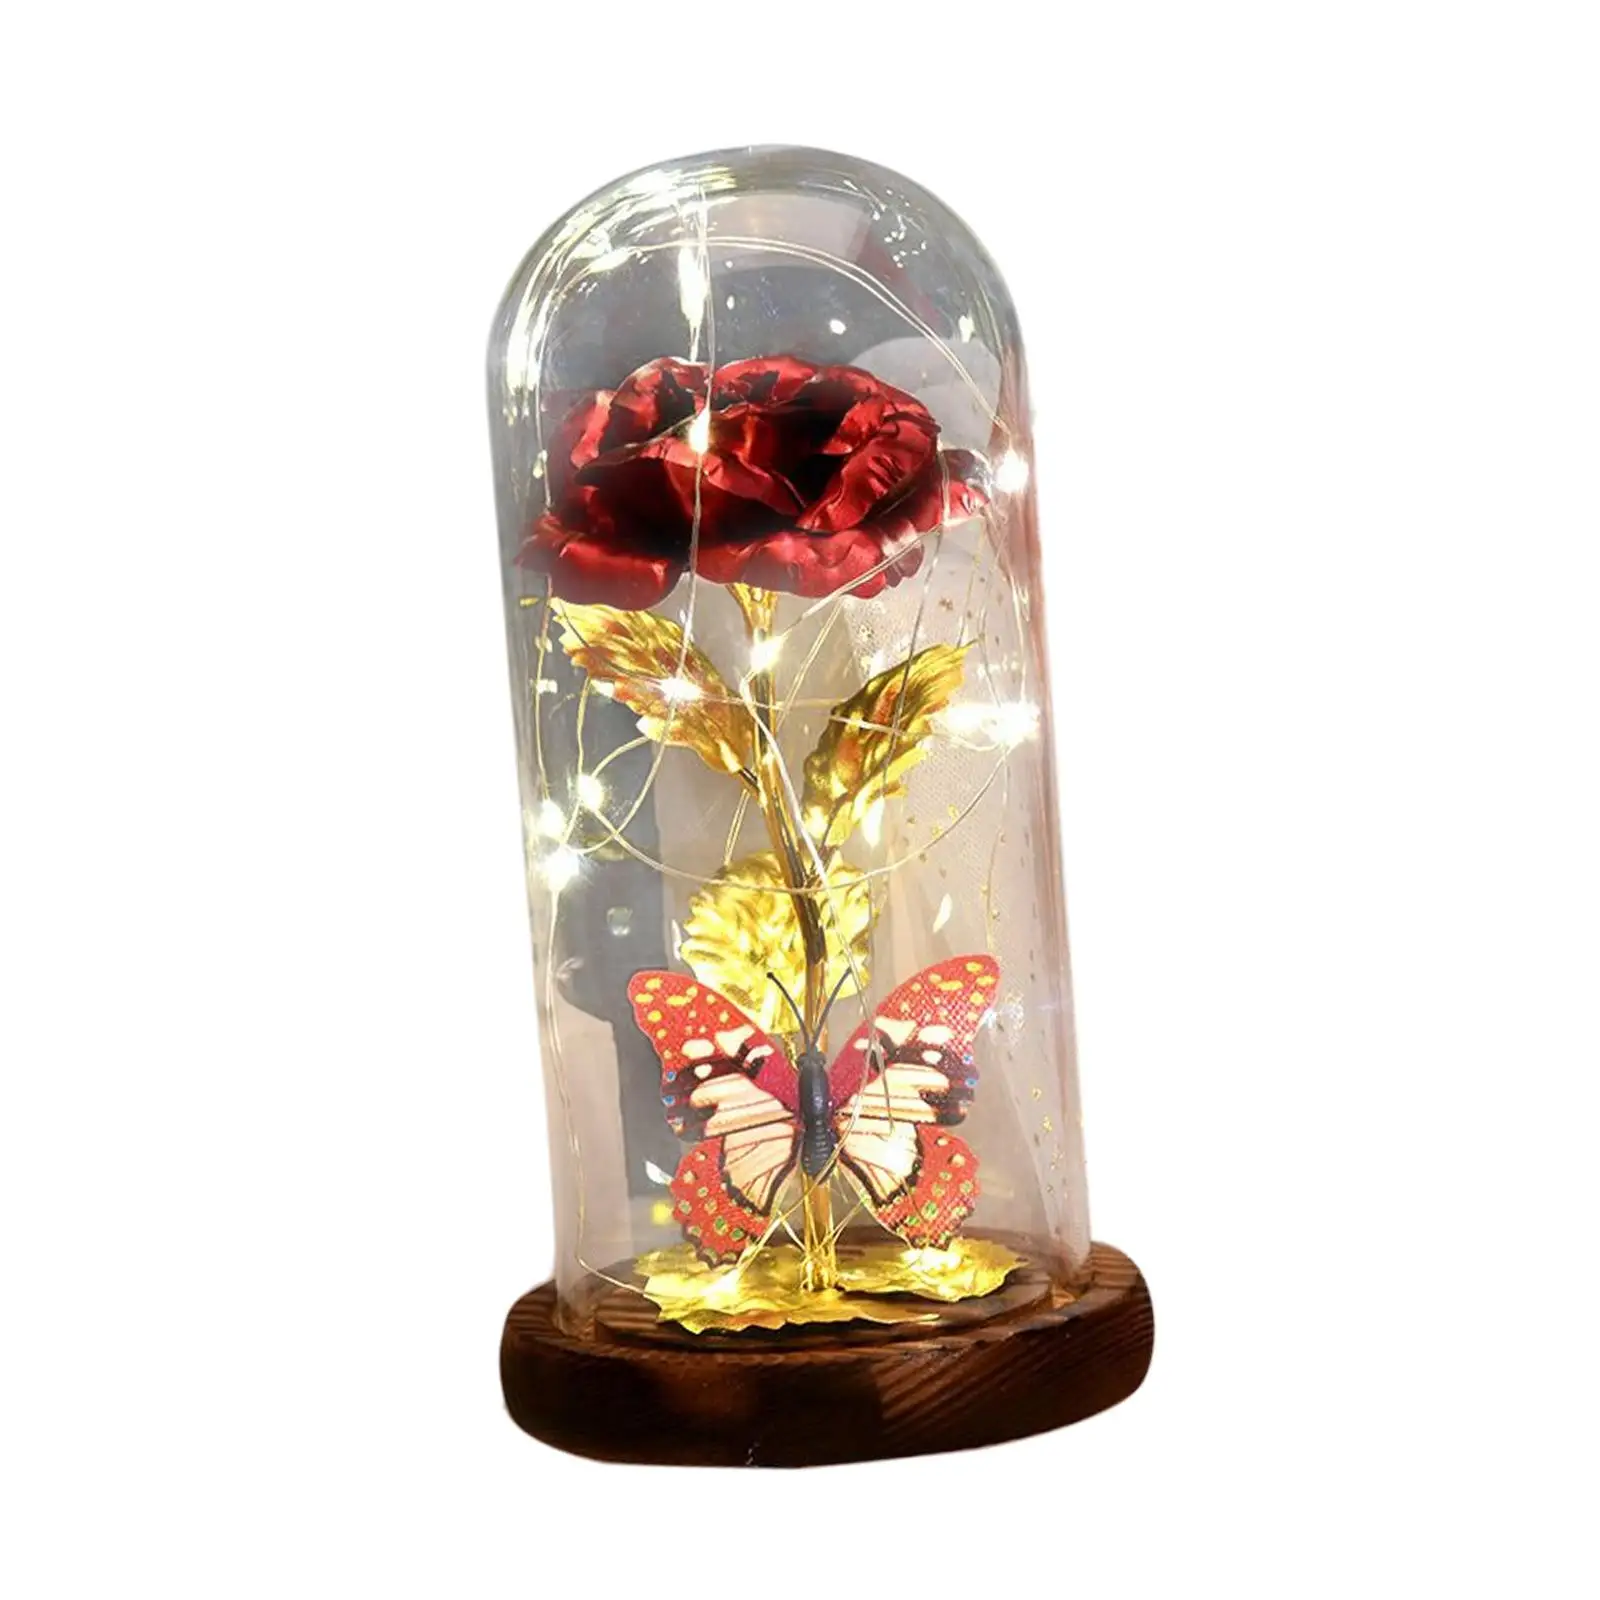 Rose Flower Ornaments Atmosphere Lamp Crafts Decorative LED Night Light for Bedroom Wedding Tabletop Fireplace Decorations